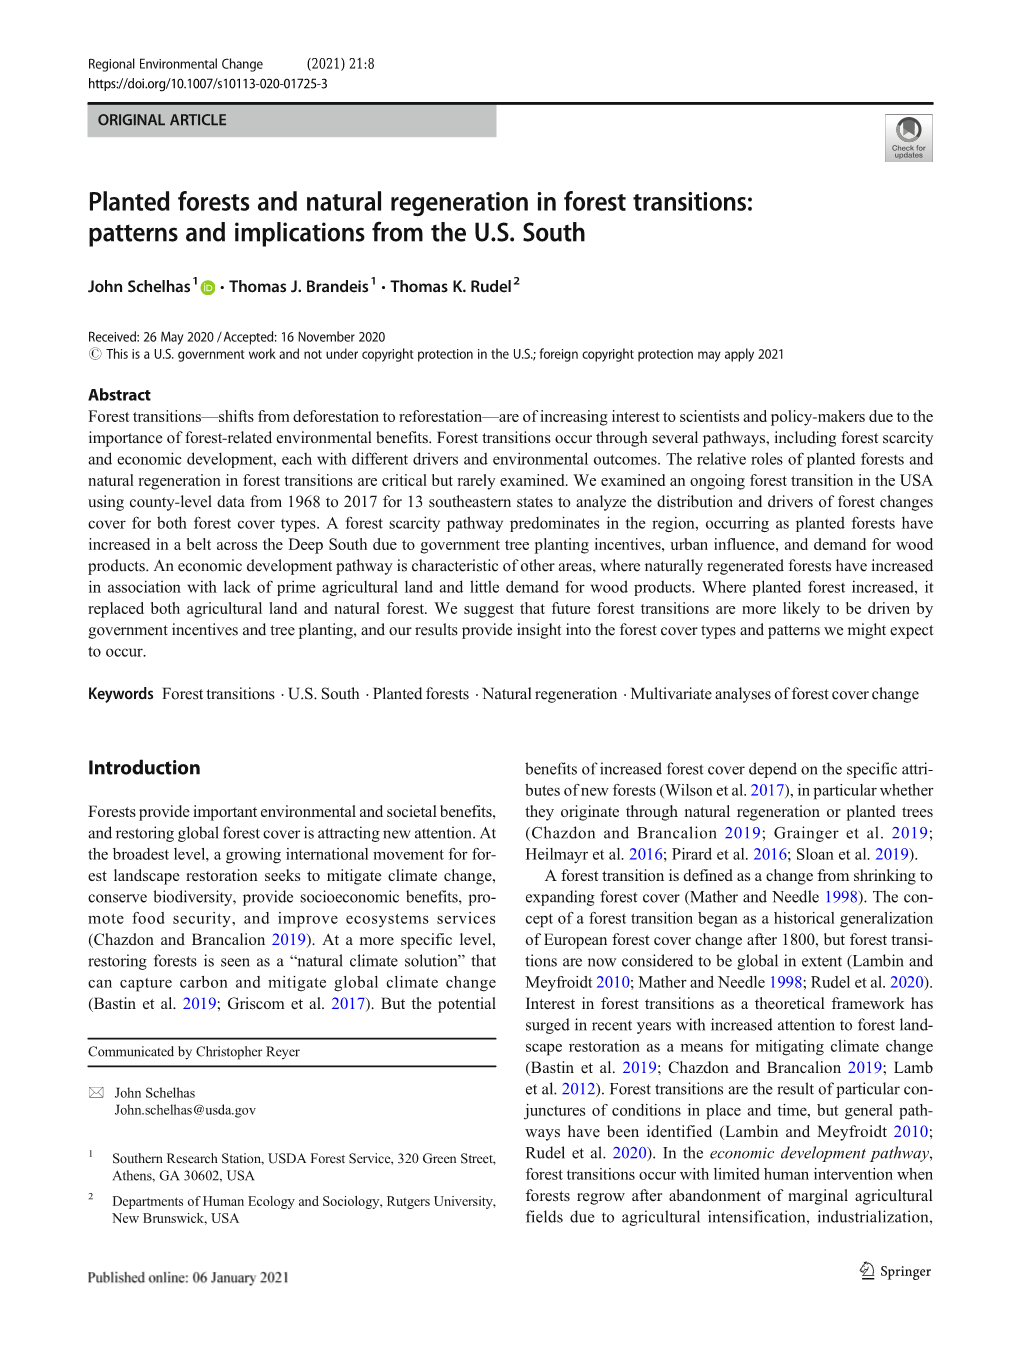 Planted Forests and Natural Regeneration in Forest Transitions: Patterns and Implications from the U.S